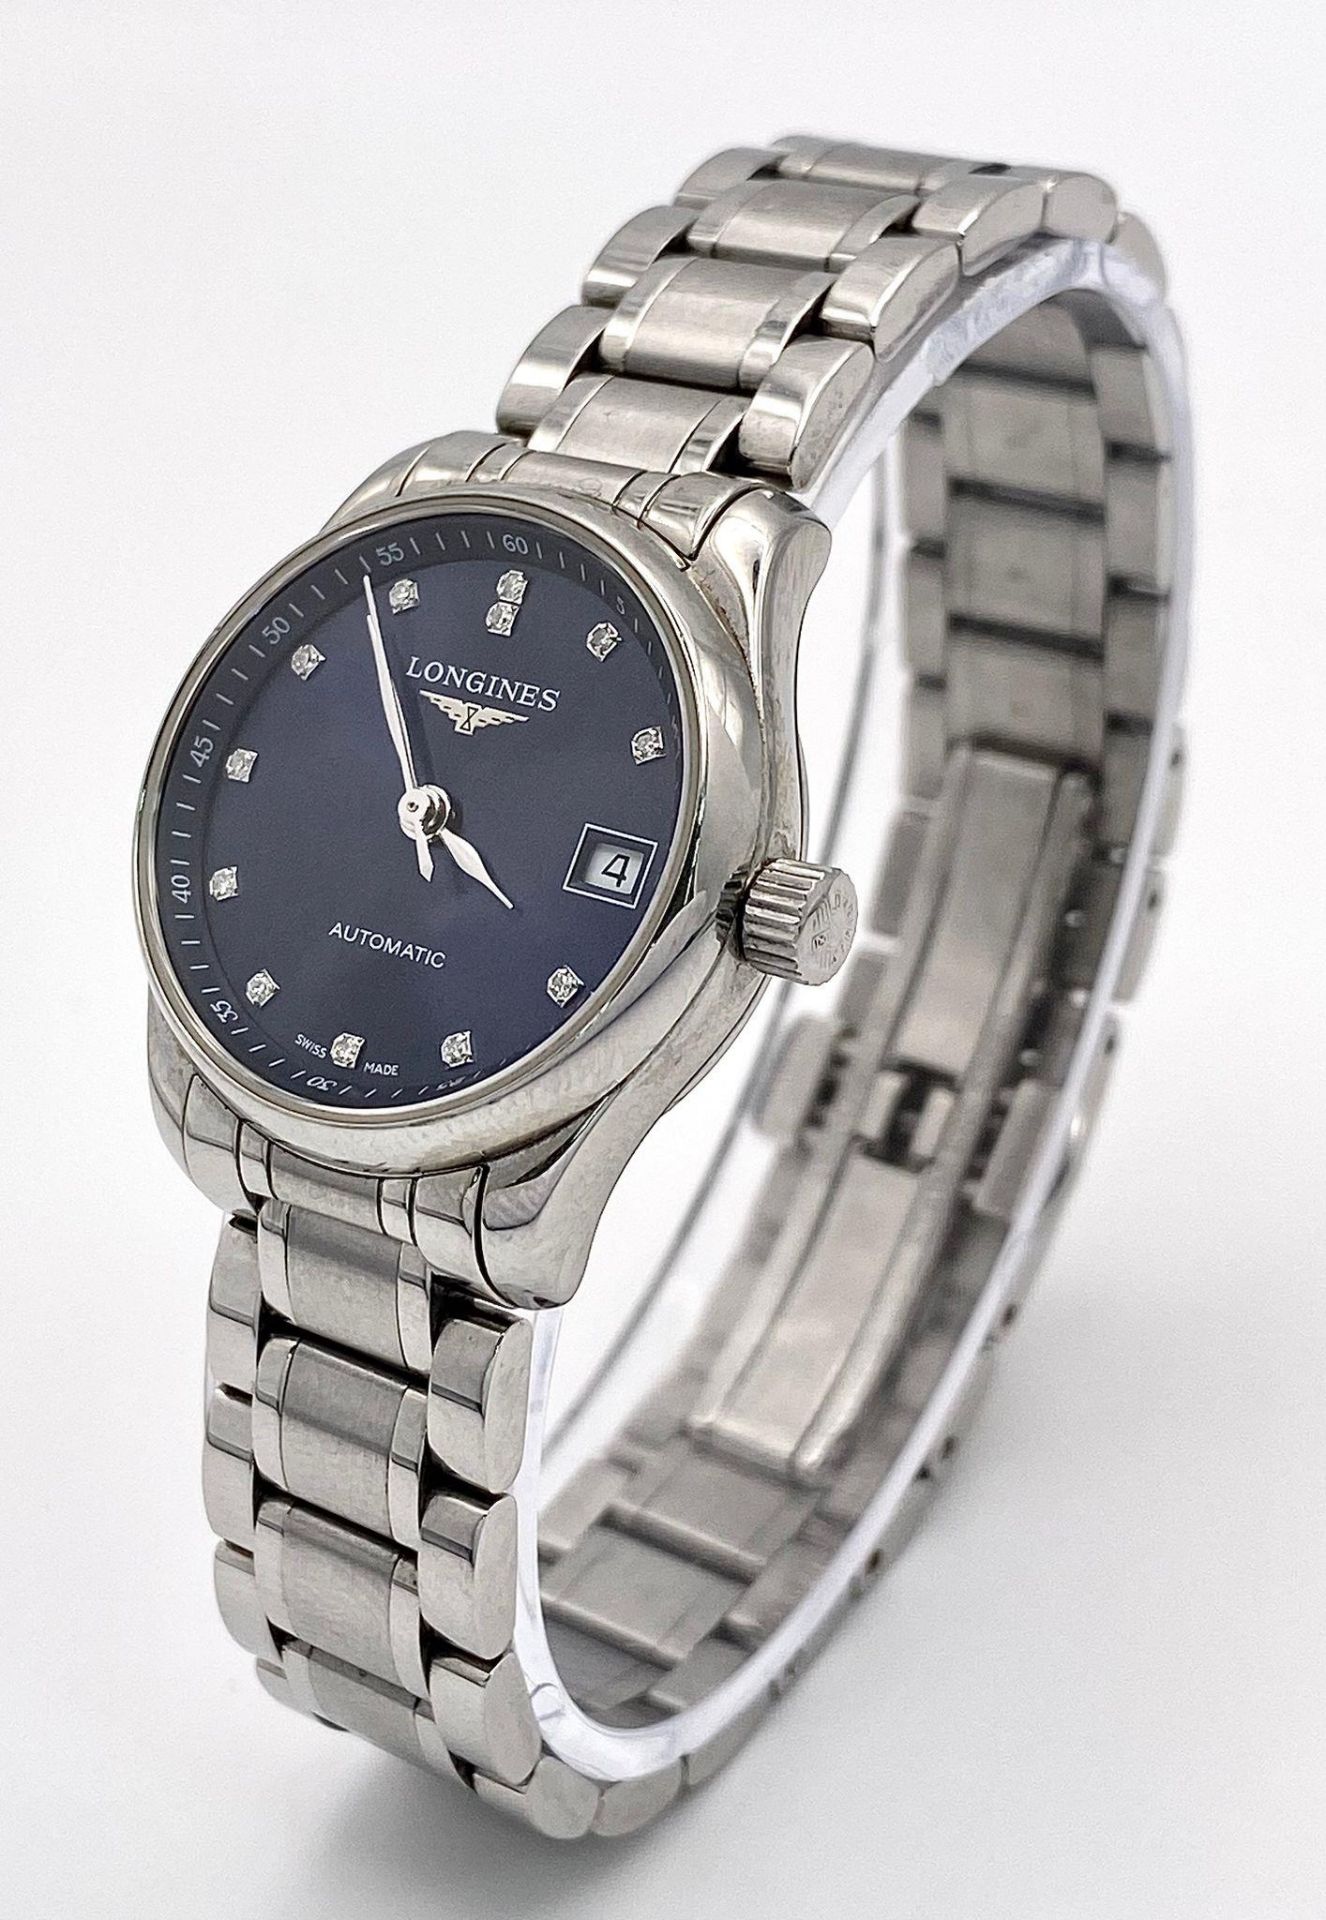 A Longines Automatic Diamond Ladies Watch. Stainless steel bracelet and case - 26mm. Electric blue